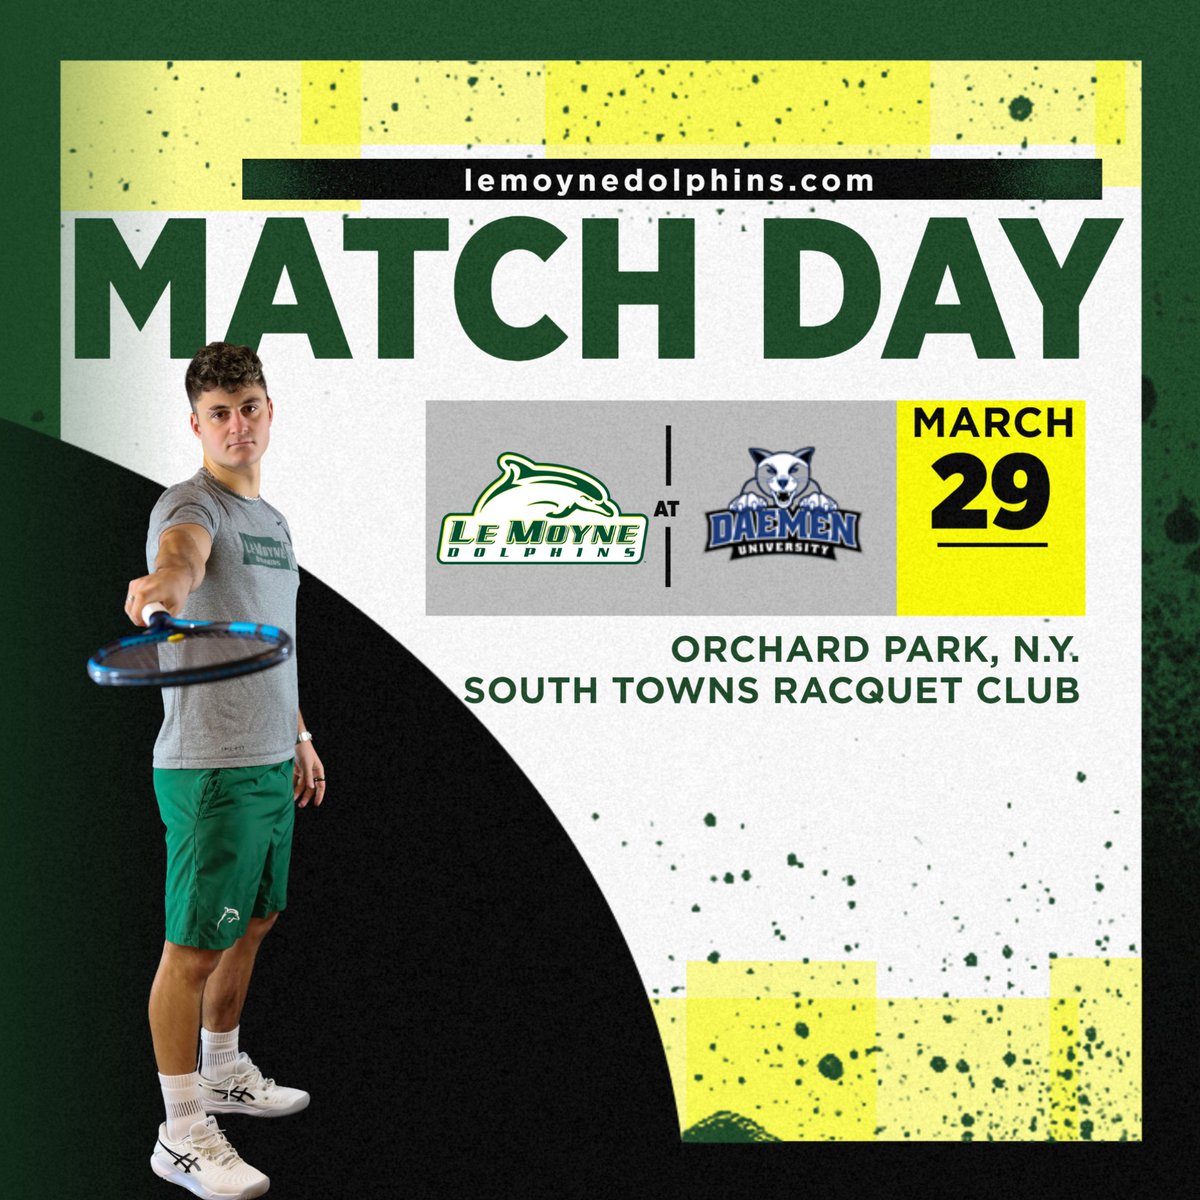 It's MATCH DAY!! 🆚 Daemen University Wildcats 🏟️South Towns Racquet Club - Orchard Park, N.Y.